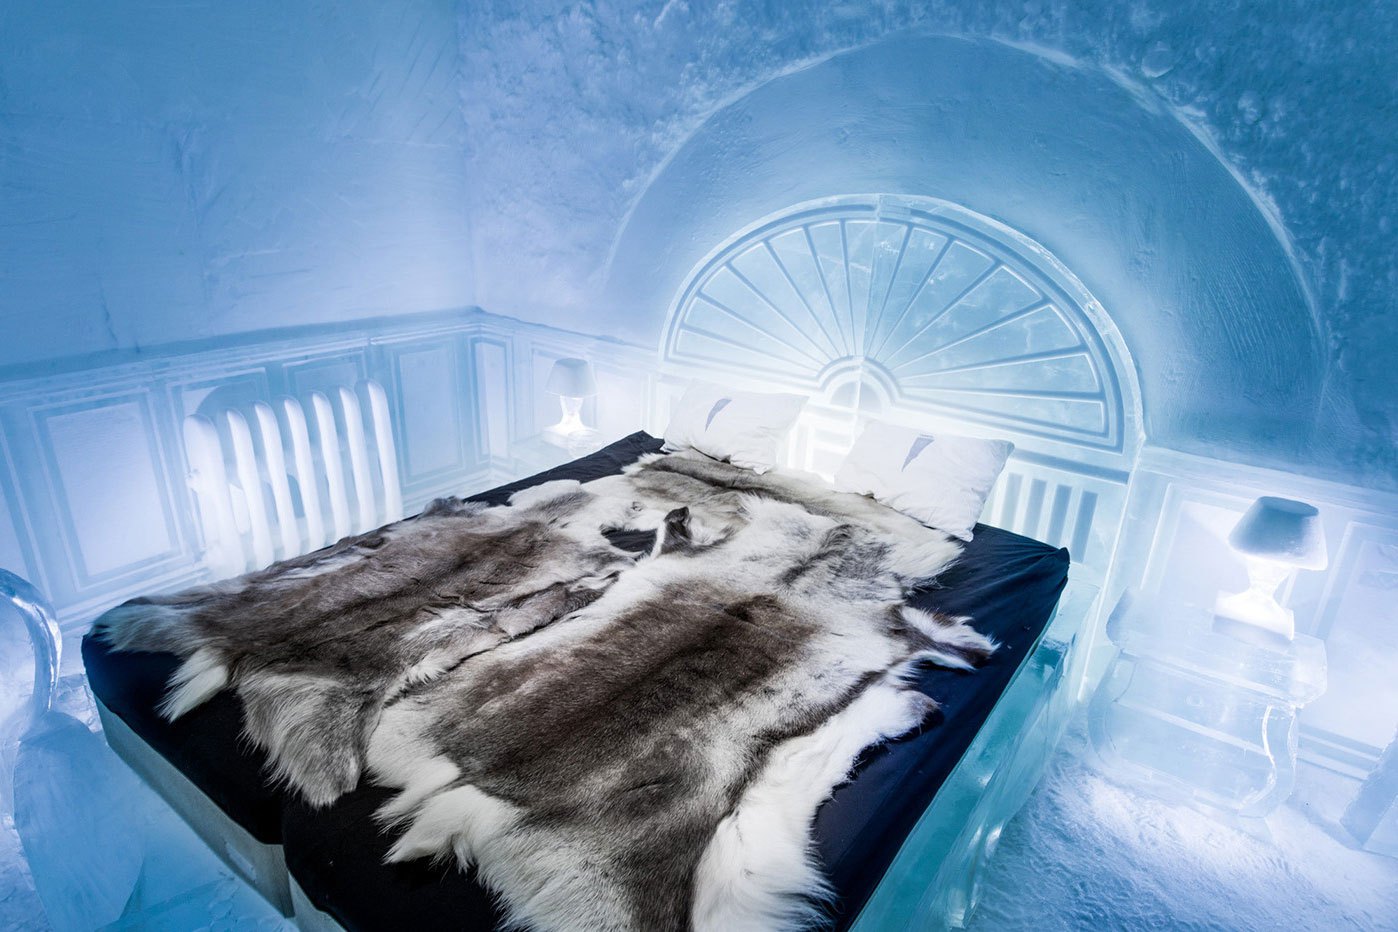 worlds-first-permanent-ice-hotel-7